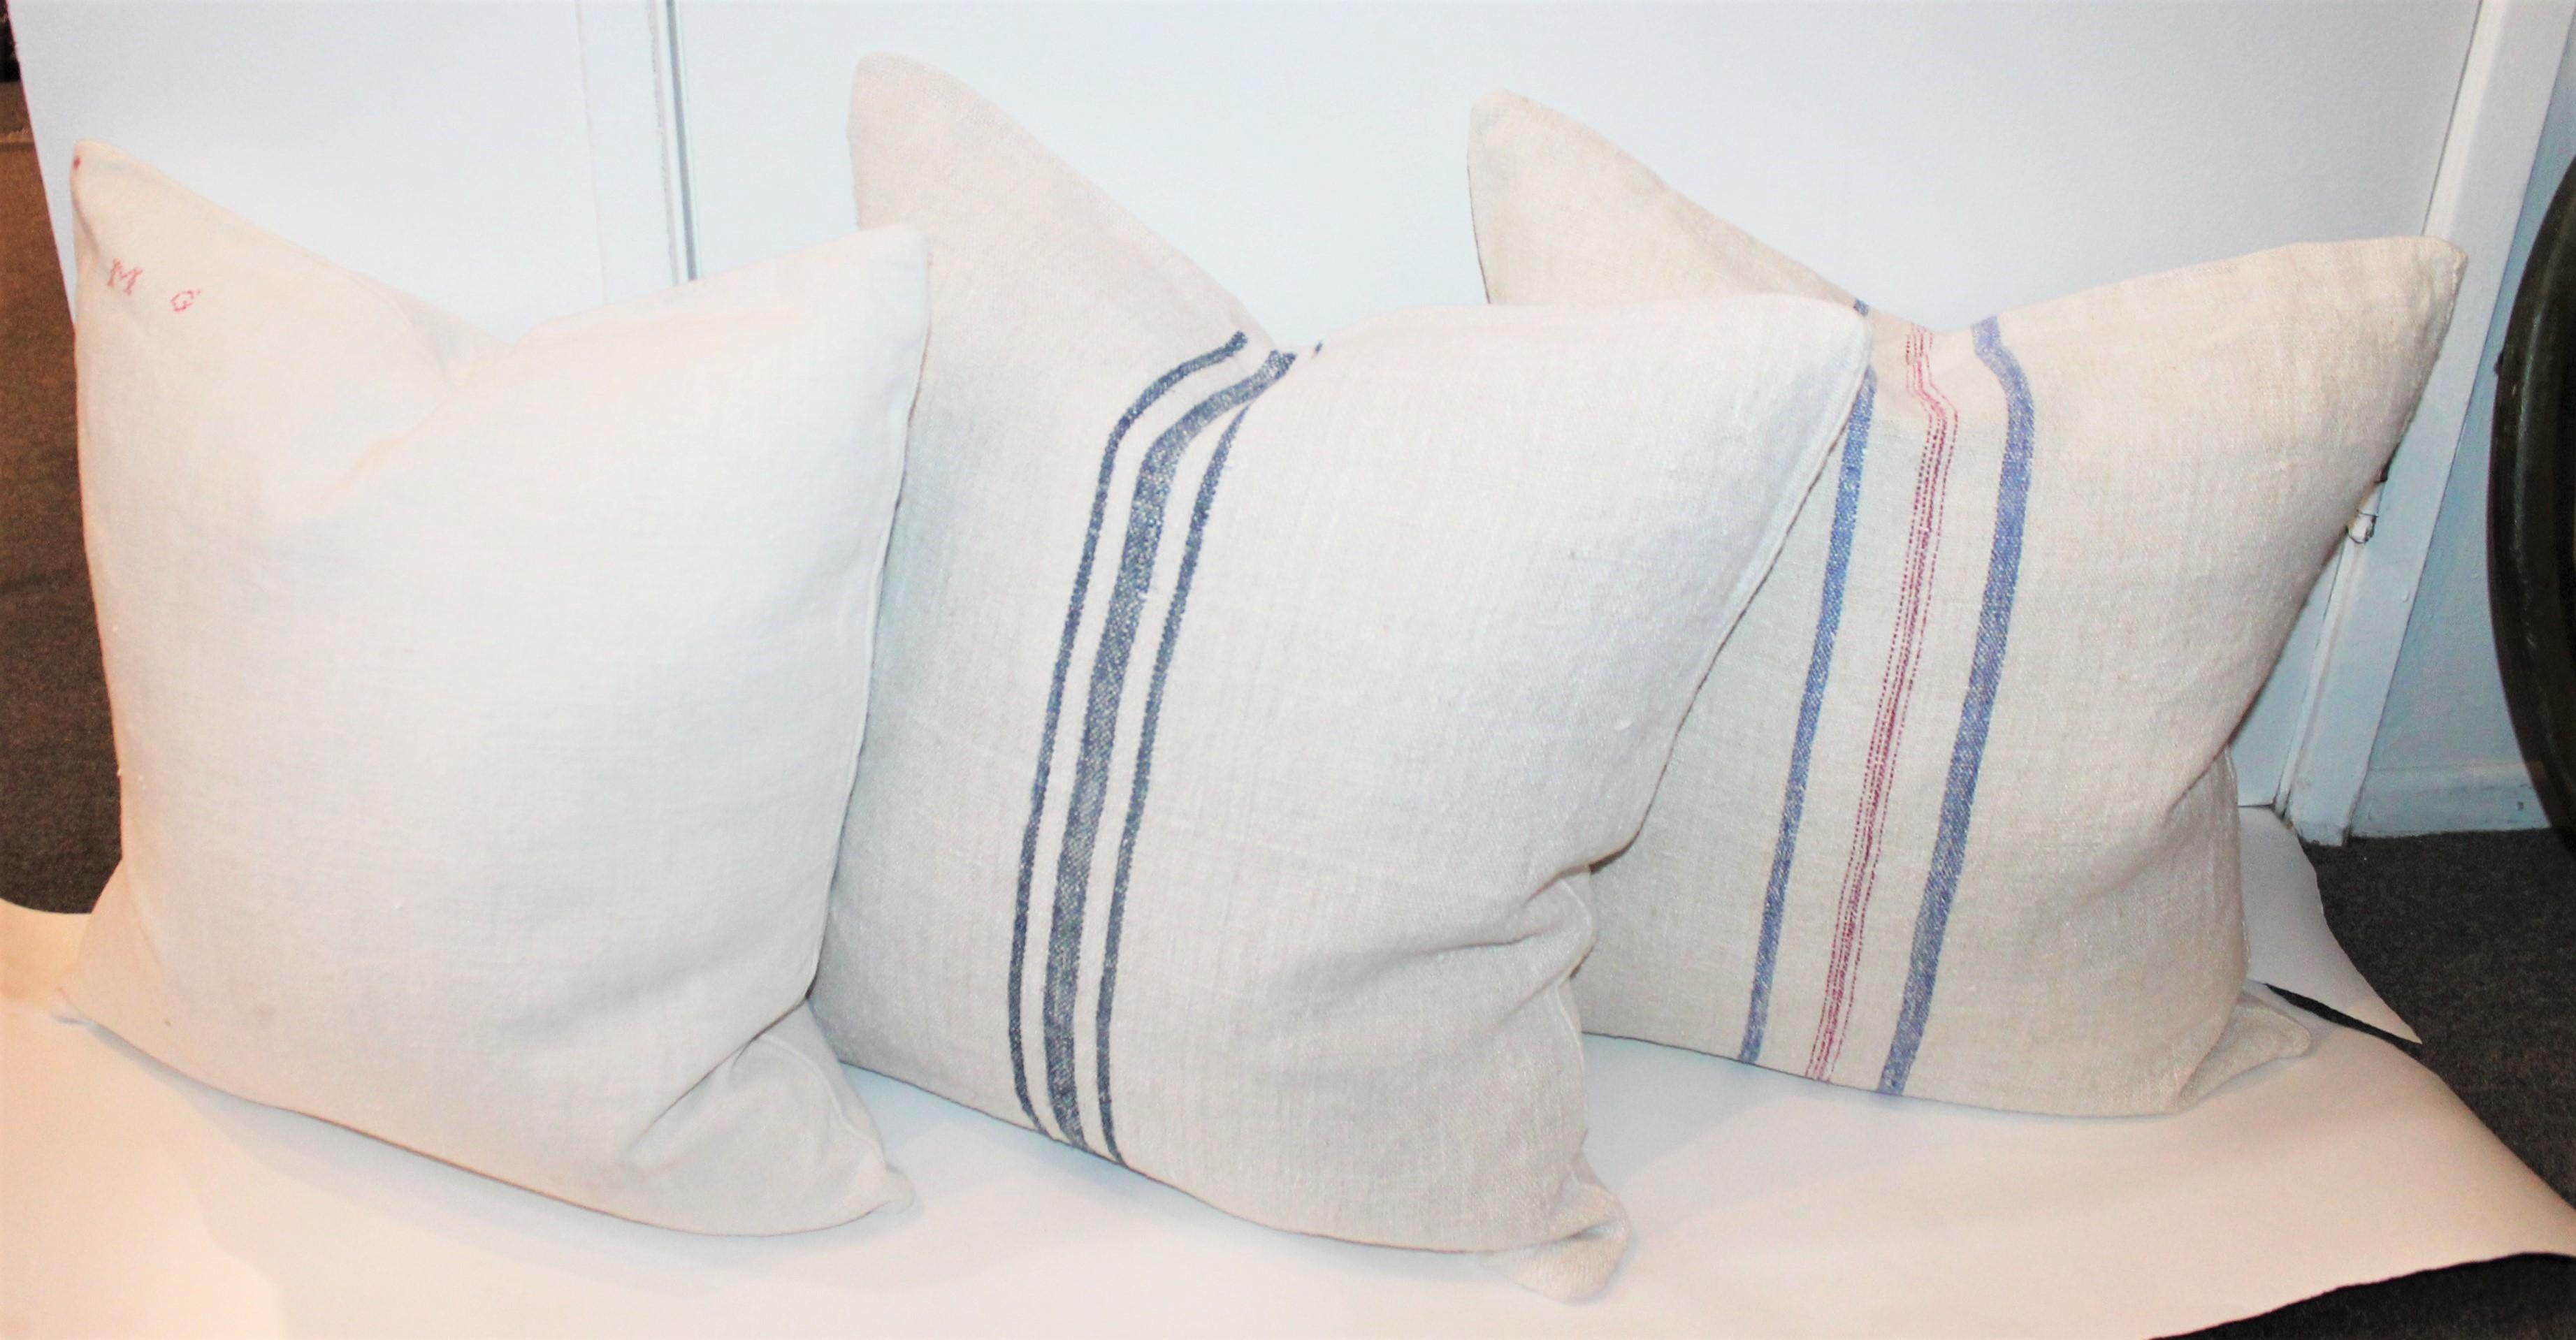 Hand selected 19th century linen made into a set of three pillows. This linen has been professionally laundered/cleaned and made with the best vintage linens found.

The blue and red striped linen pillow is a double sided with identical pattern on